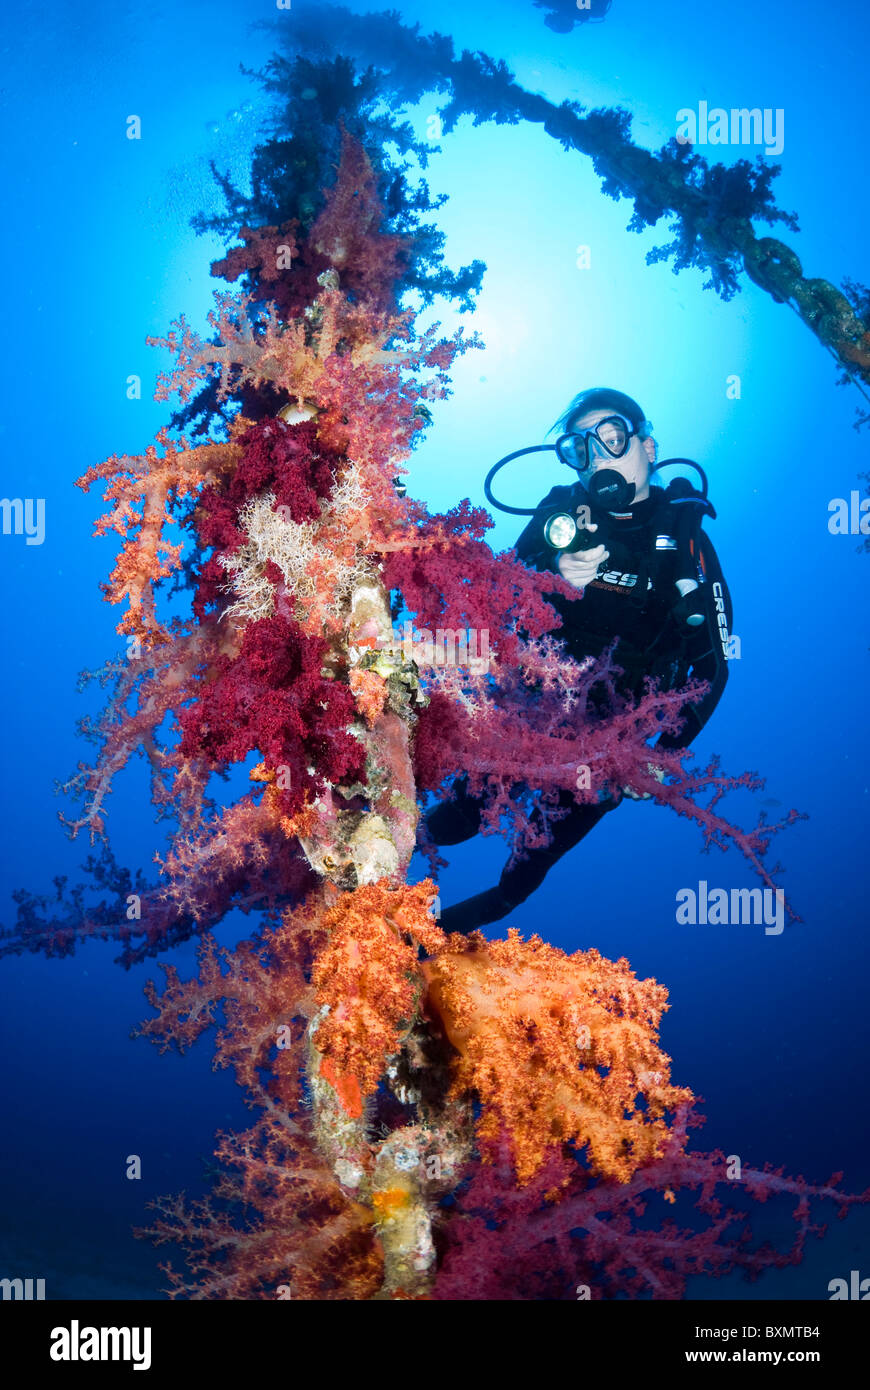 Coral growth on the chain structure. Stock Photo